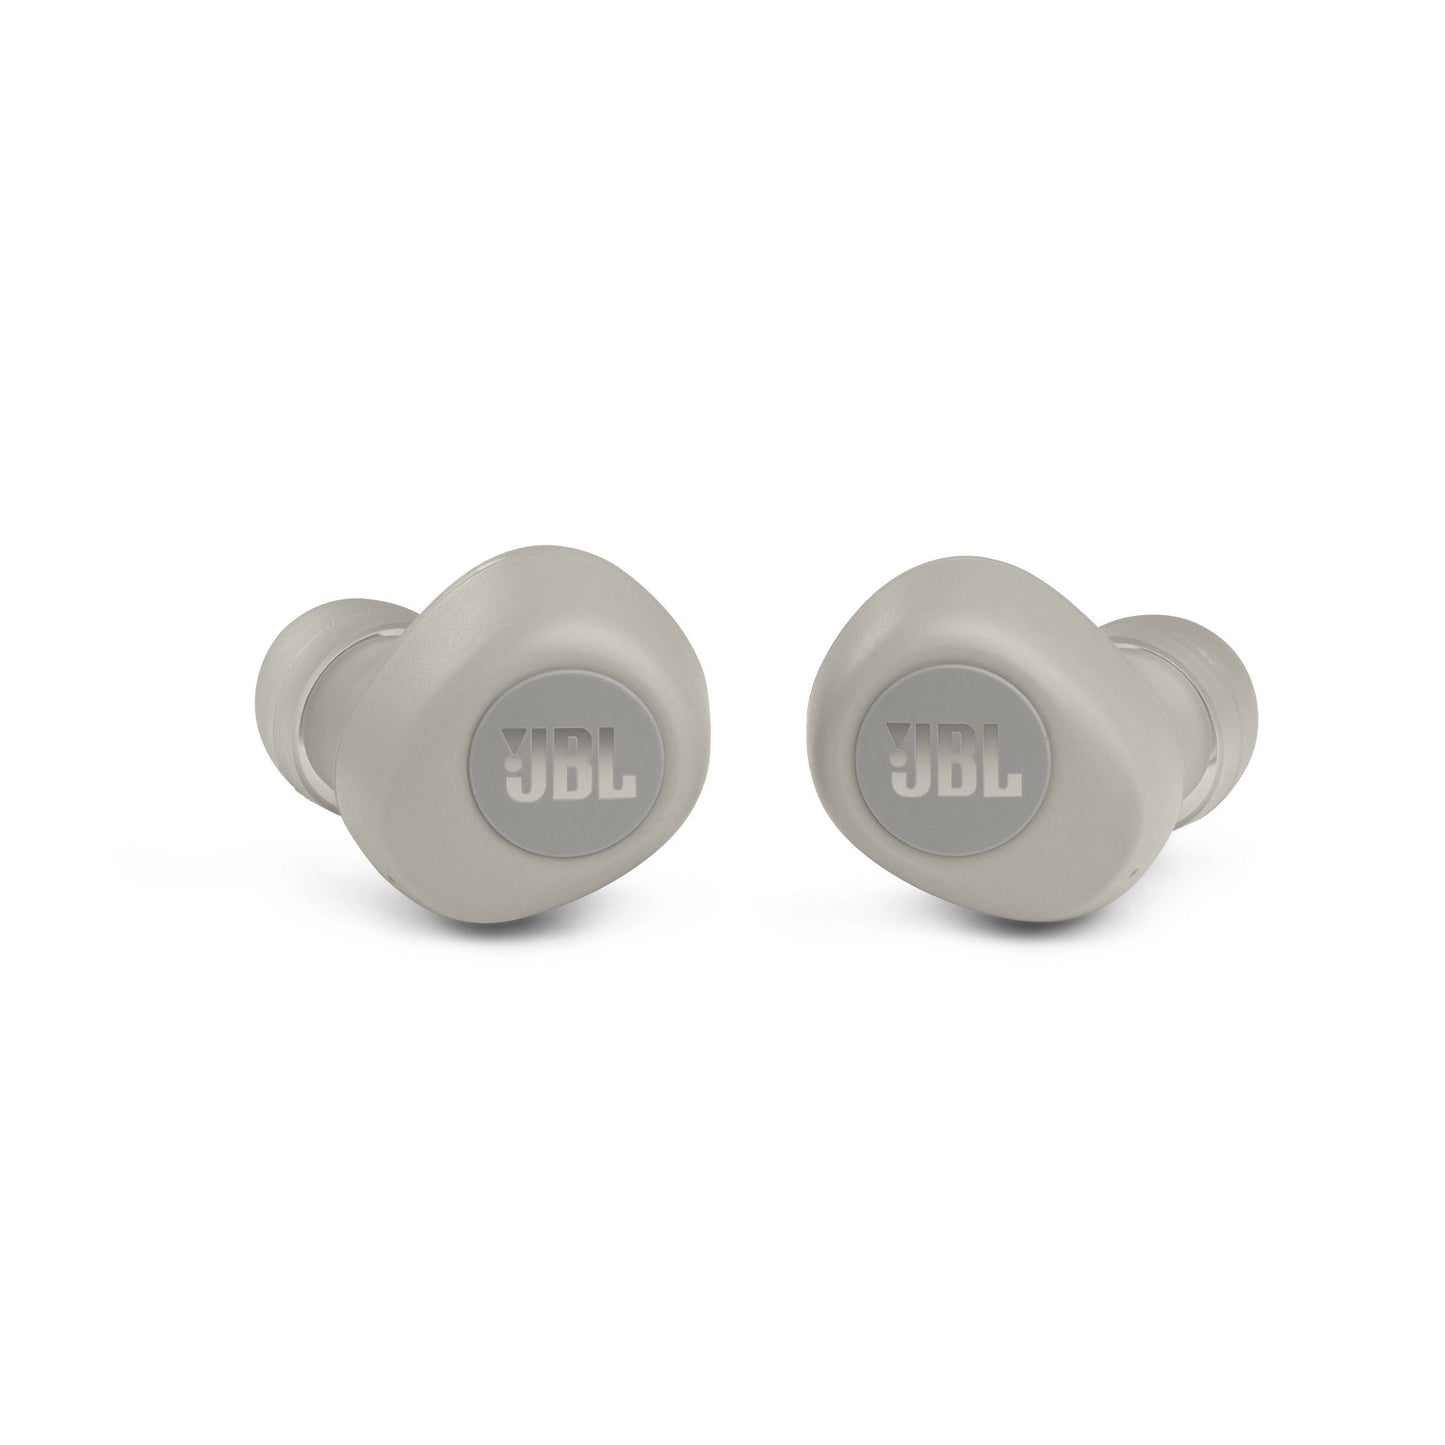 JBL Wave 100 True Wireless Bluethooth In-Ear Headphones, pocket earphones with JBL Deep Bass sound and Dual Connect, 5+15 hours battery life, ivory color